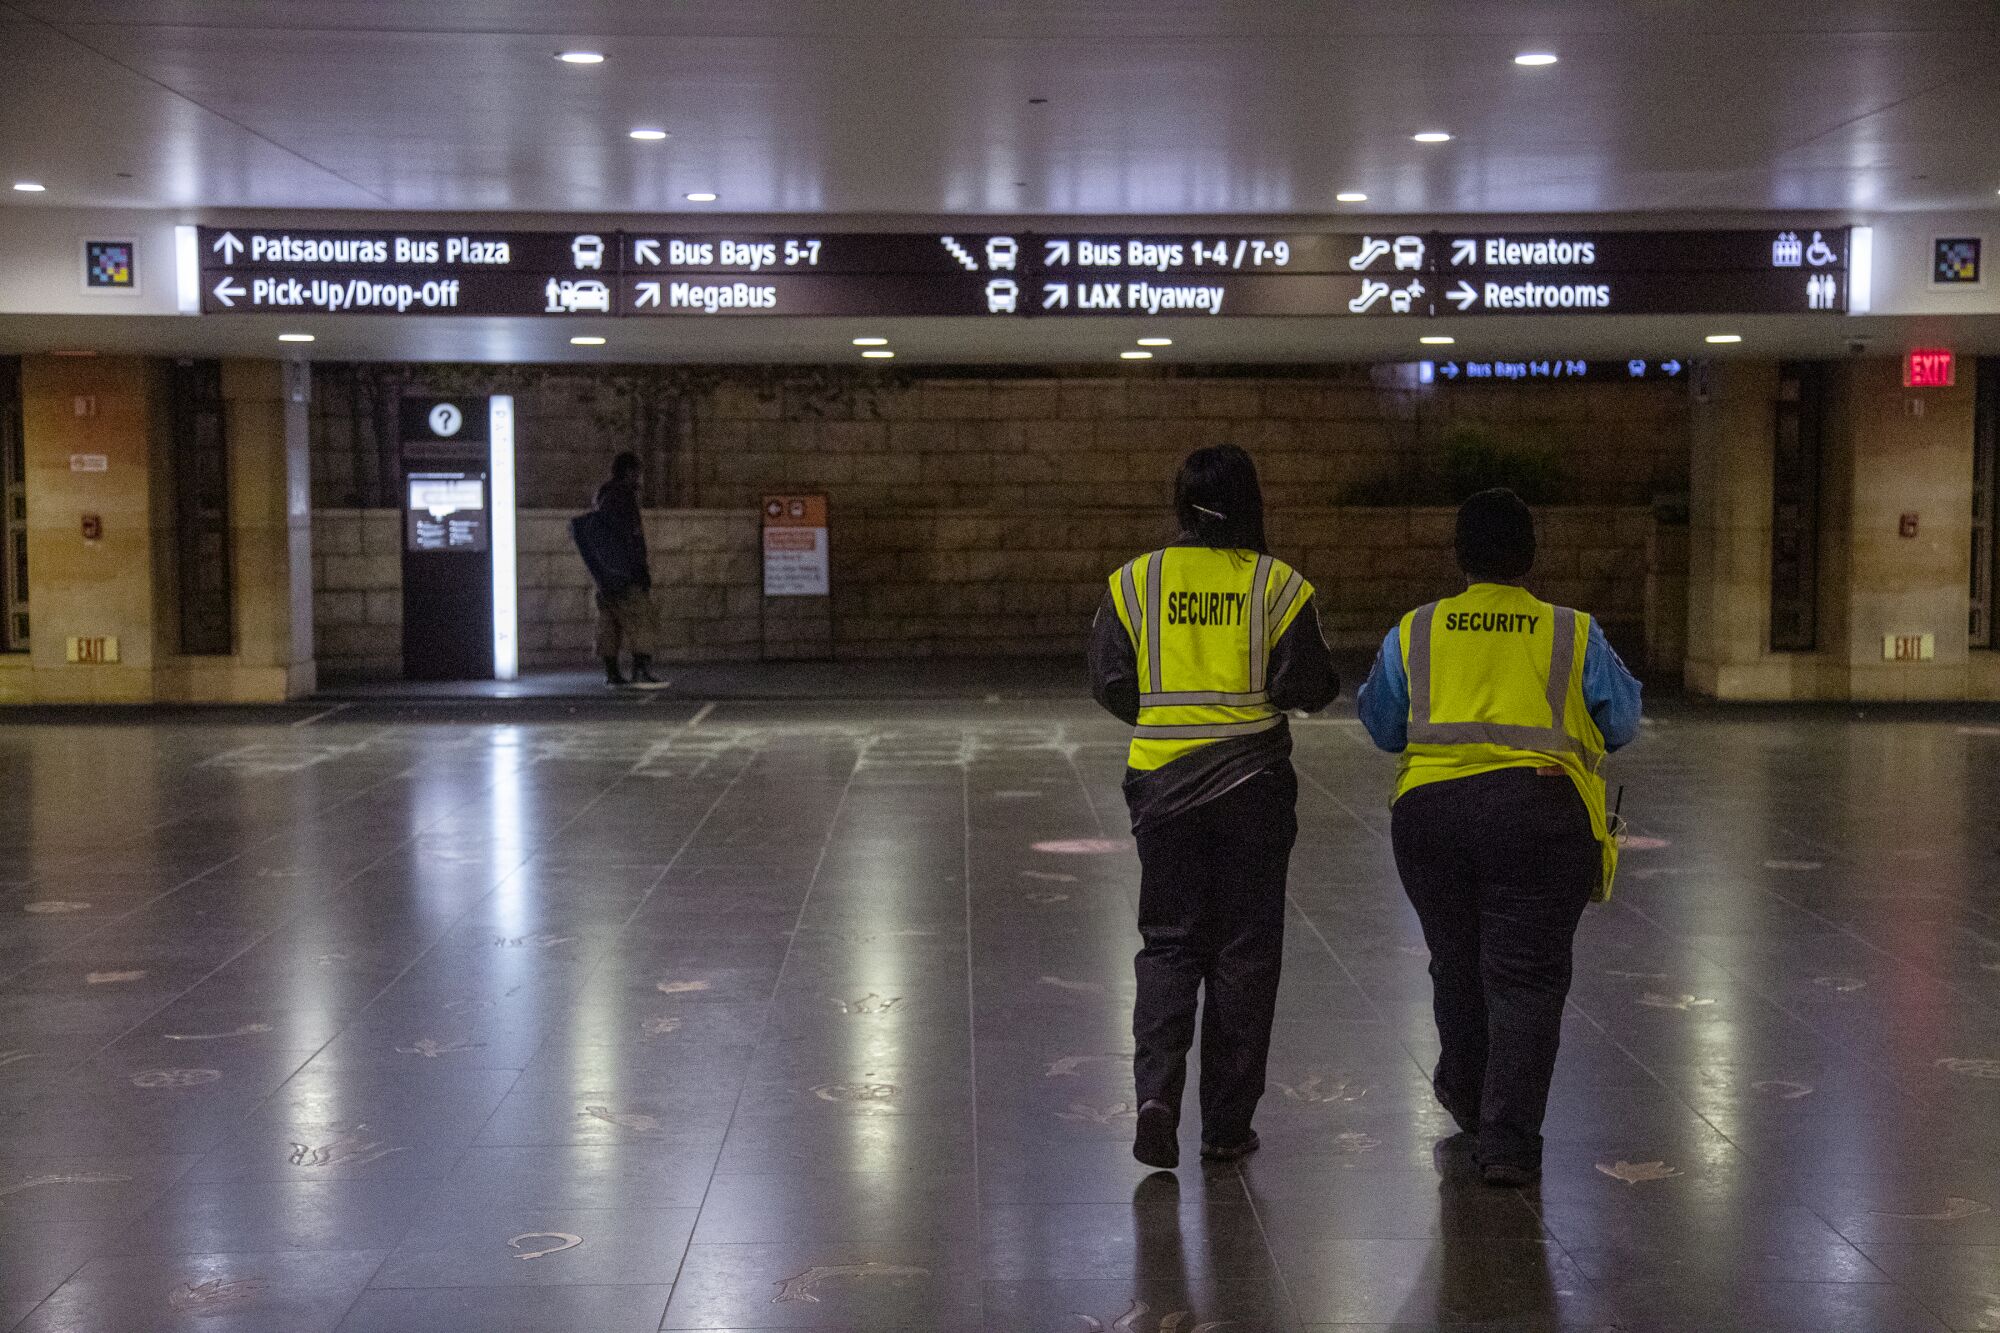 Security personnel in neon yellow vests walk through Union Station